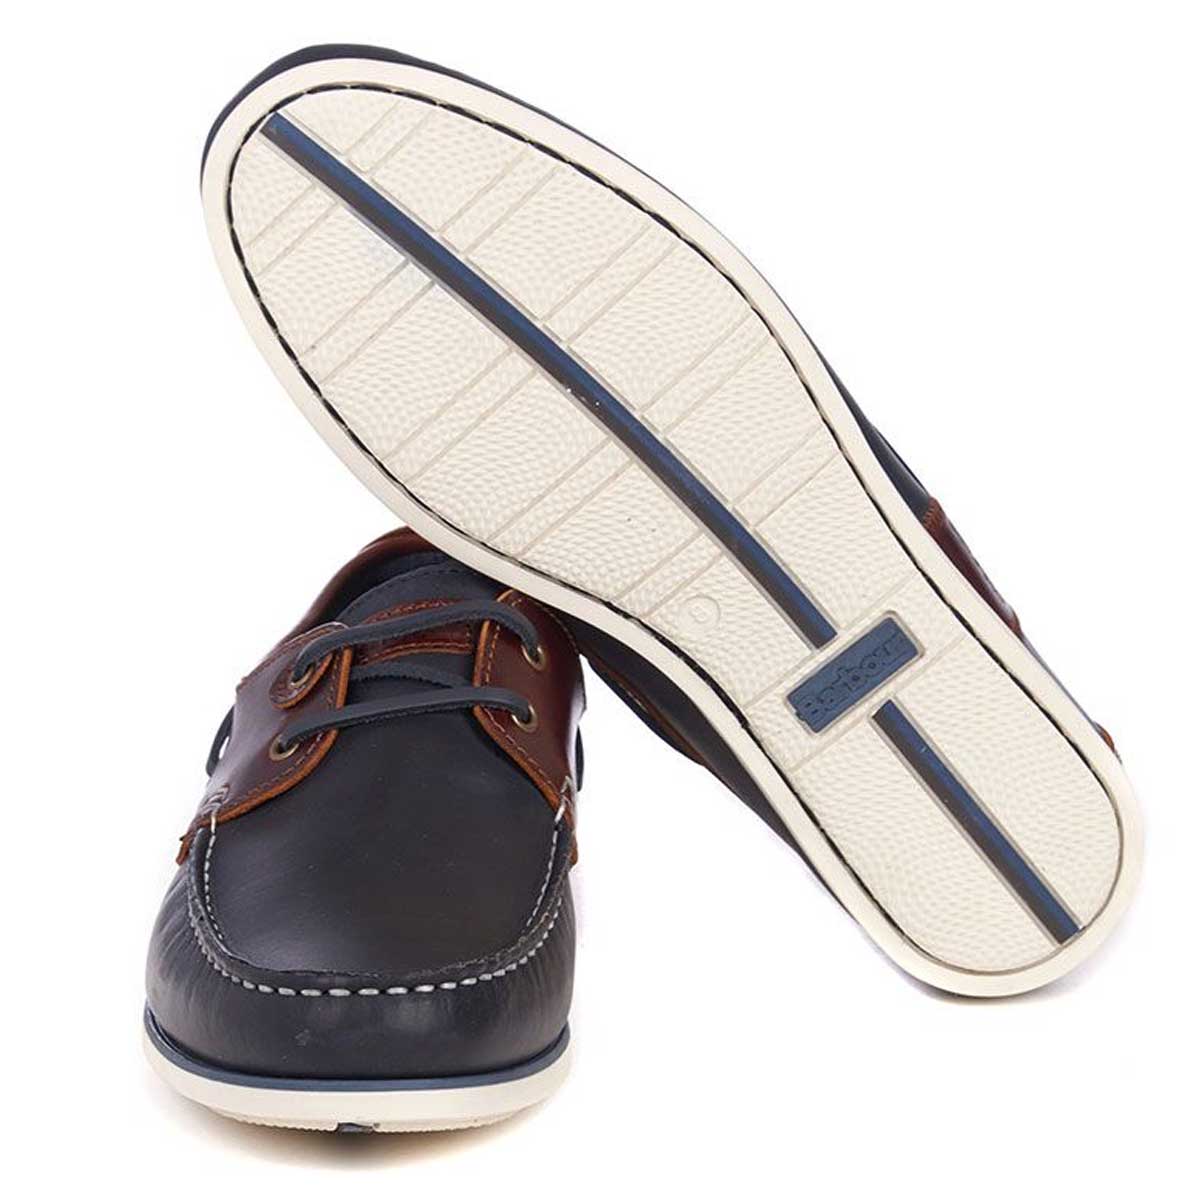 BARBOUR Capstan Boat Shoes - Mens Leather - Navy & Brown